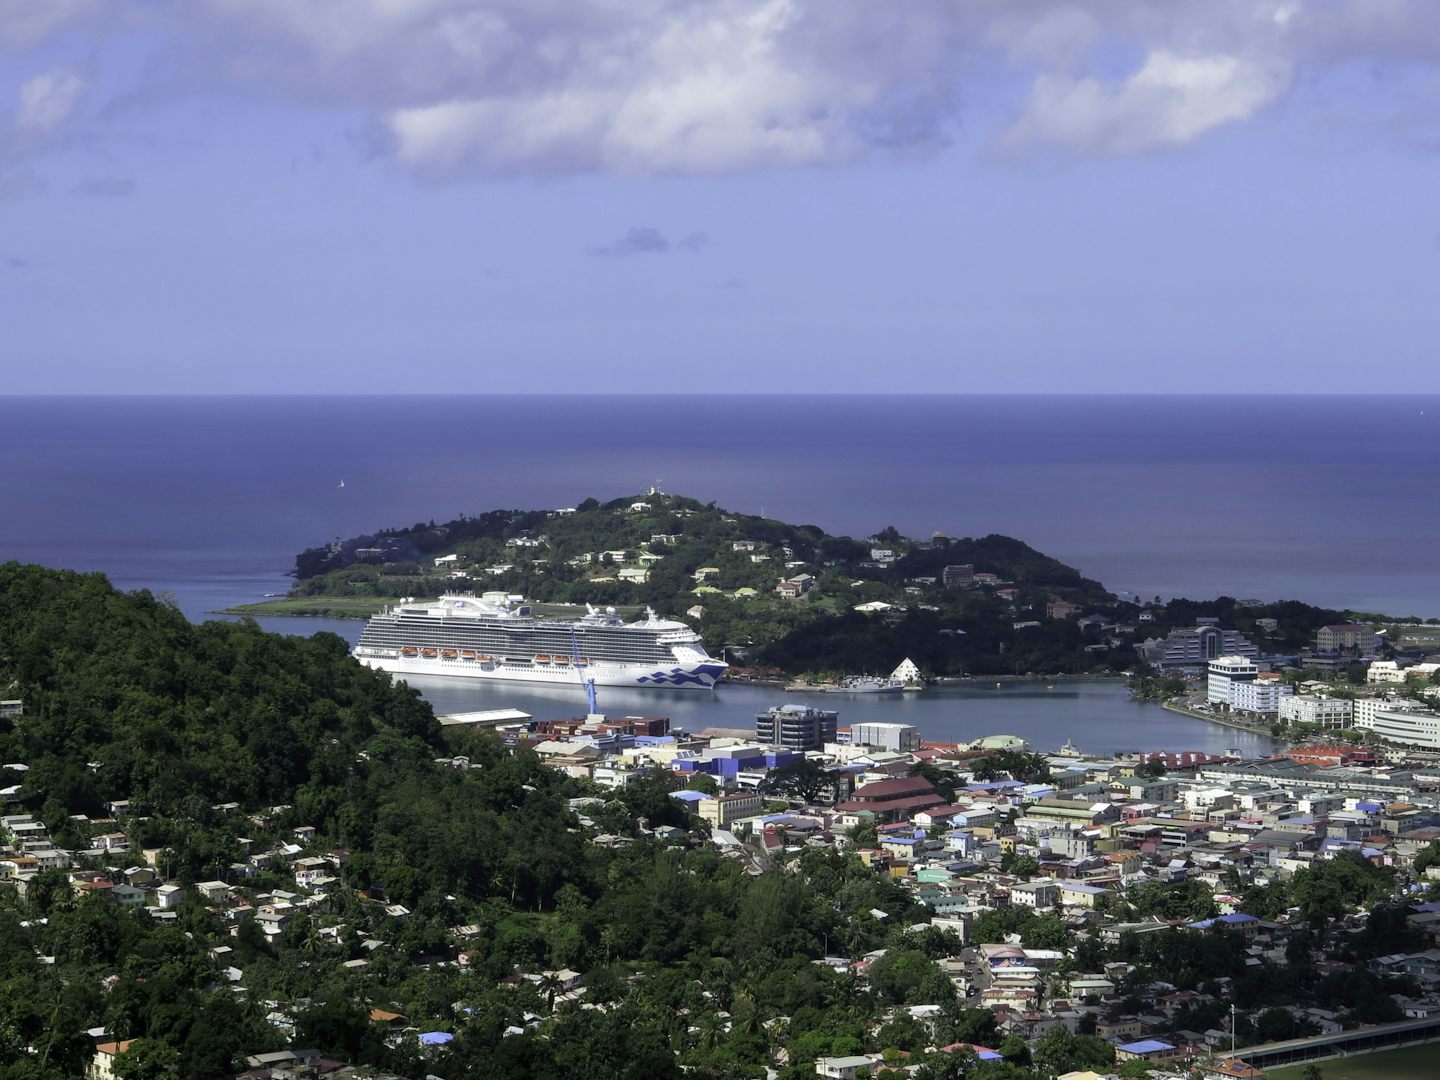 The Royal Princess in the St. Lucia surroundings.